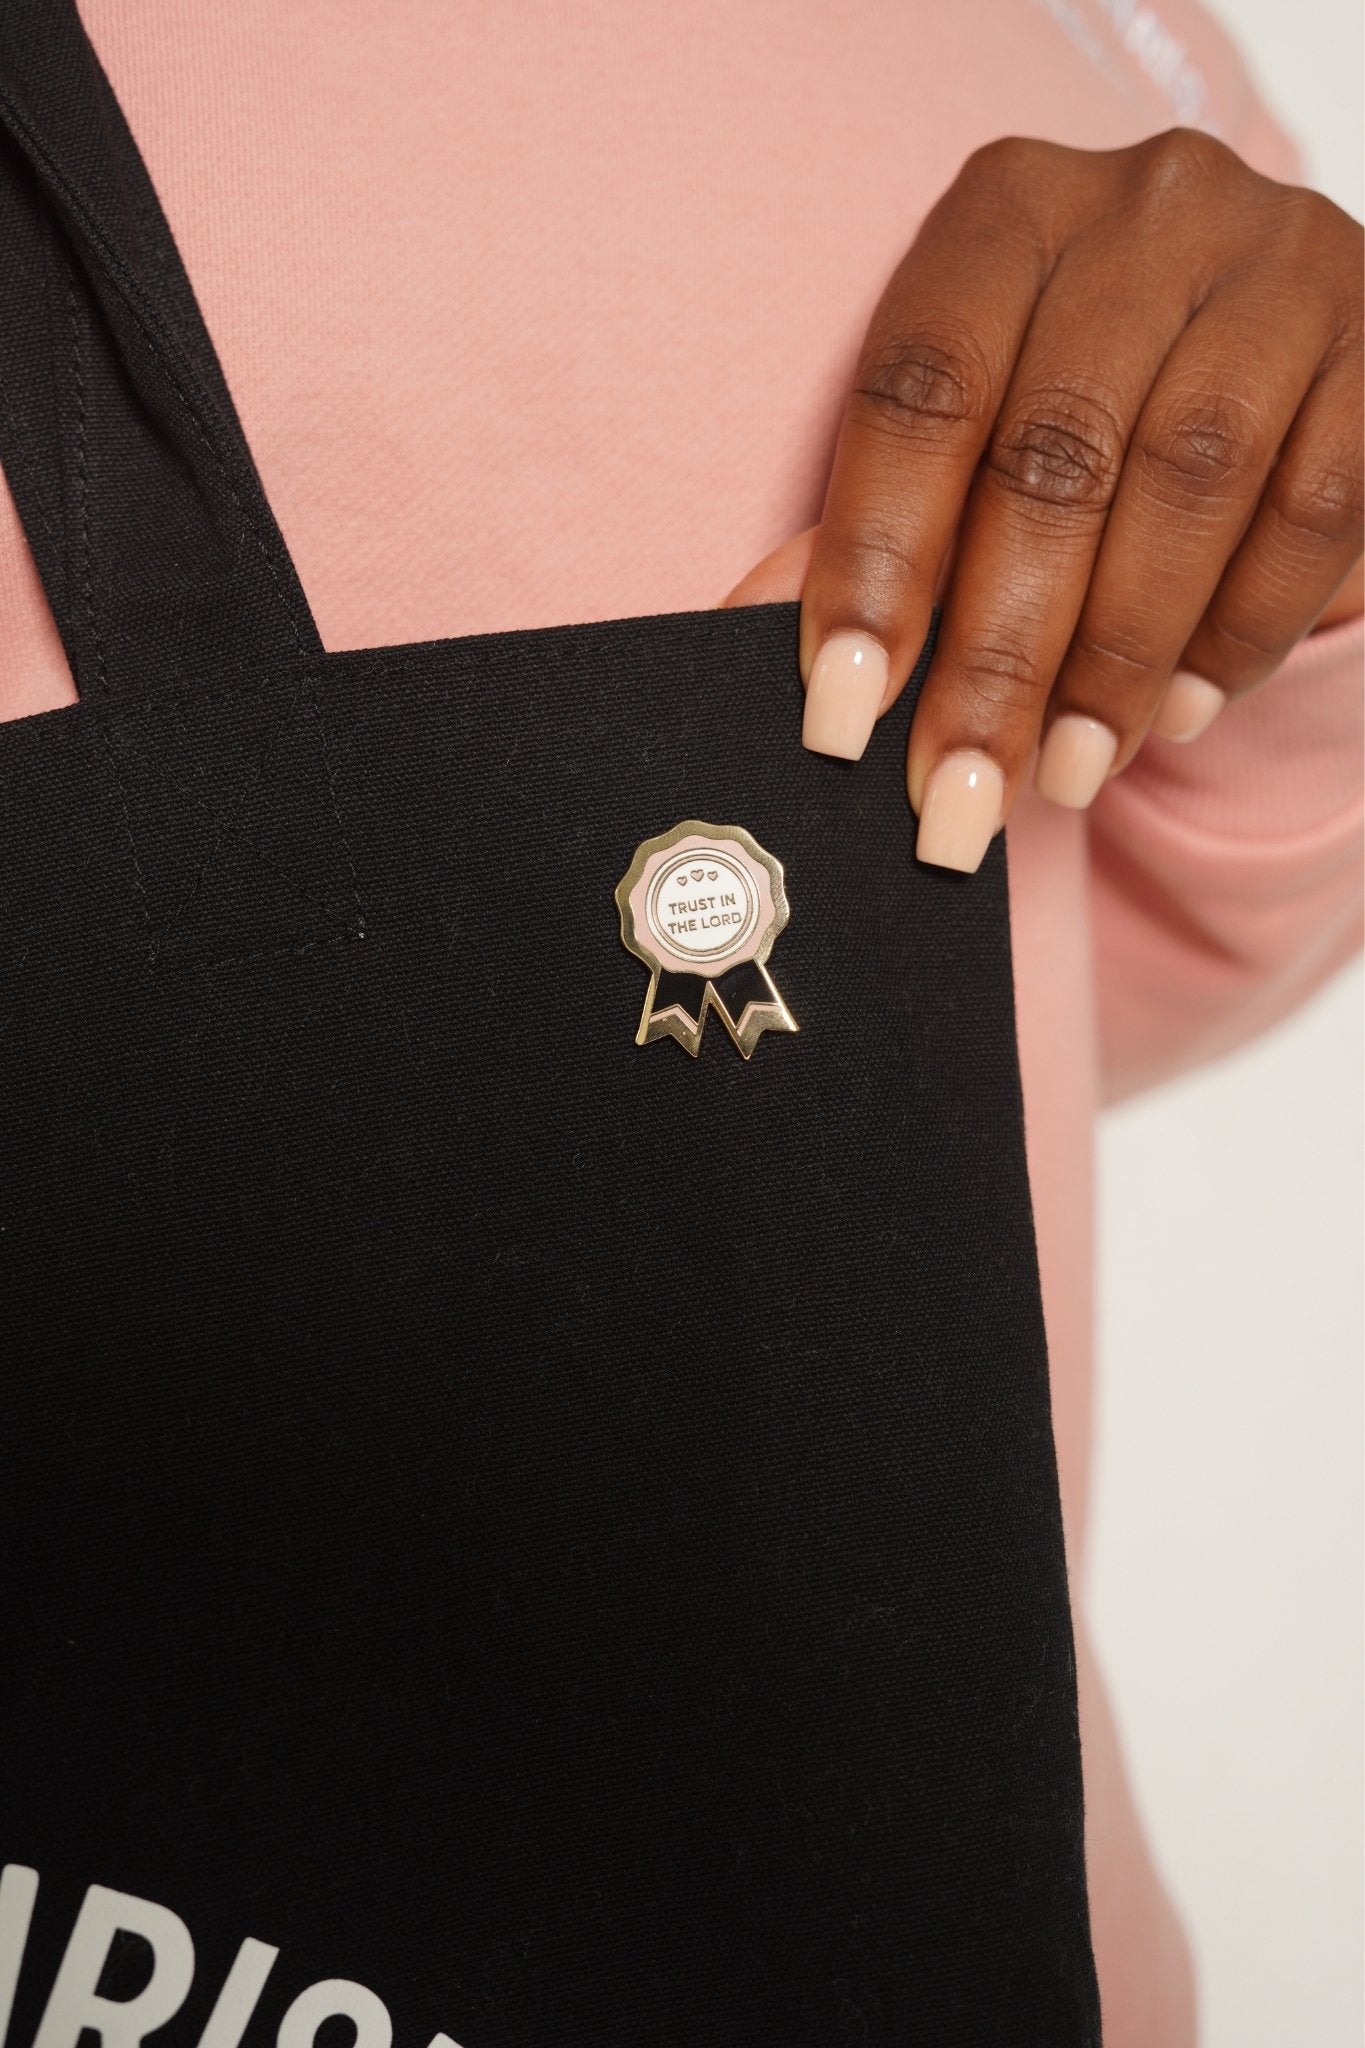 "TRUST IN THE LORD" PIN - Lavish by Grace